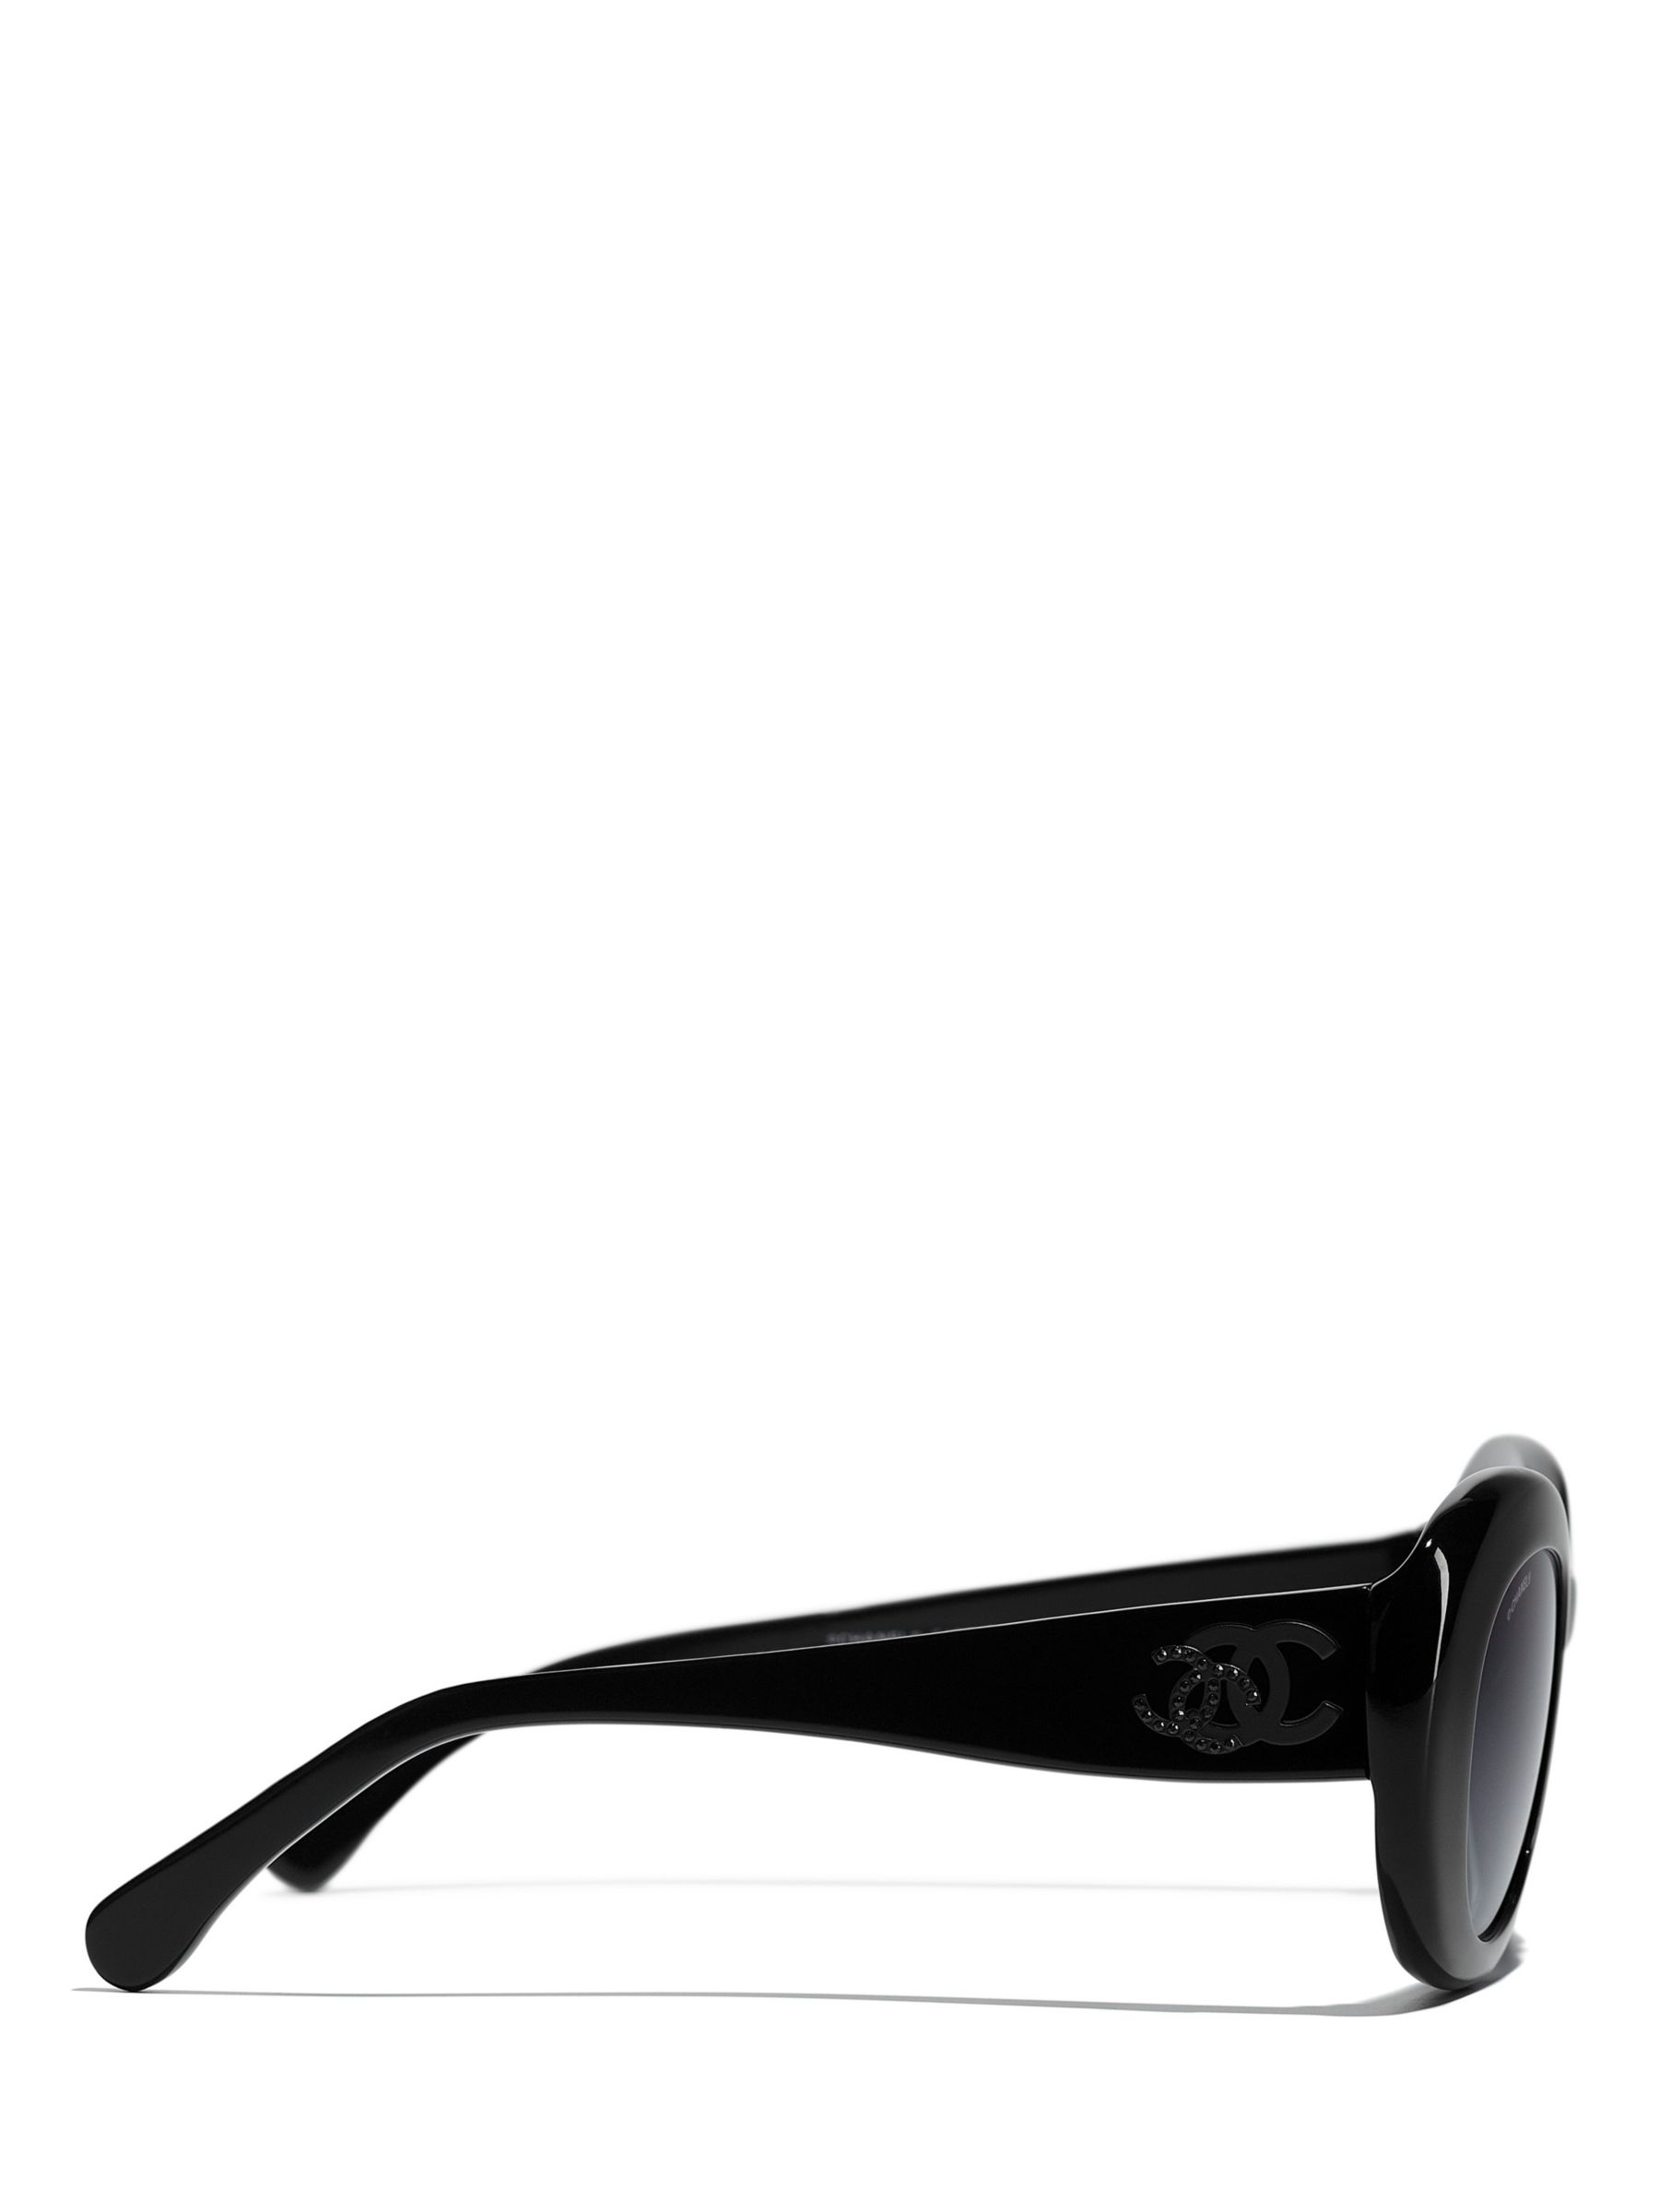 Buy CHANEL Oval Sunglasses CH5469B Black/Grey Gradient Online at johnlewis.com